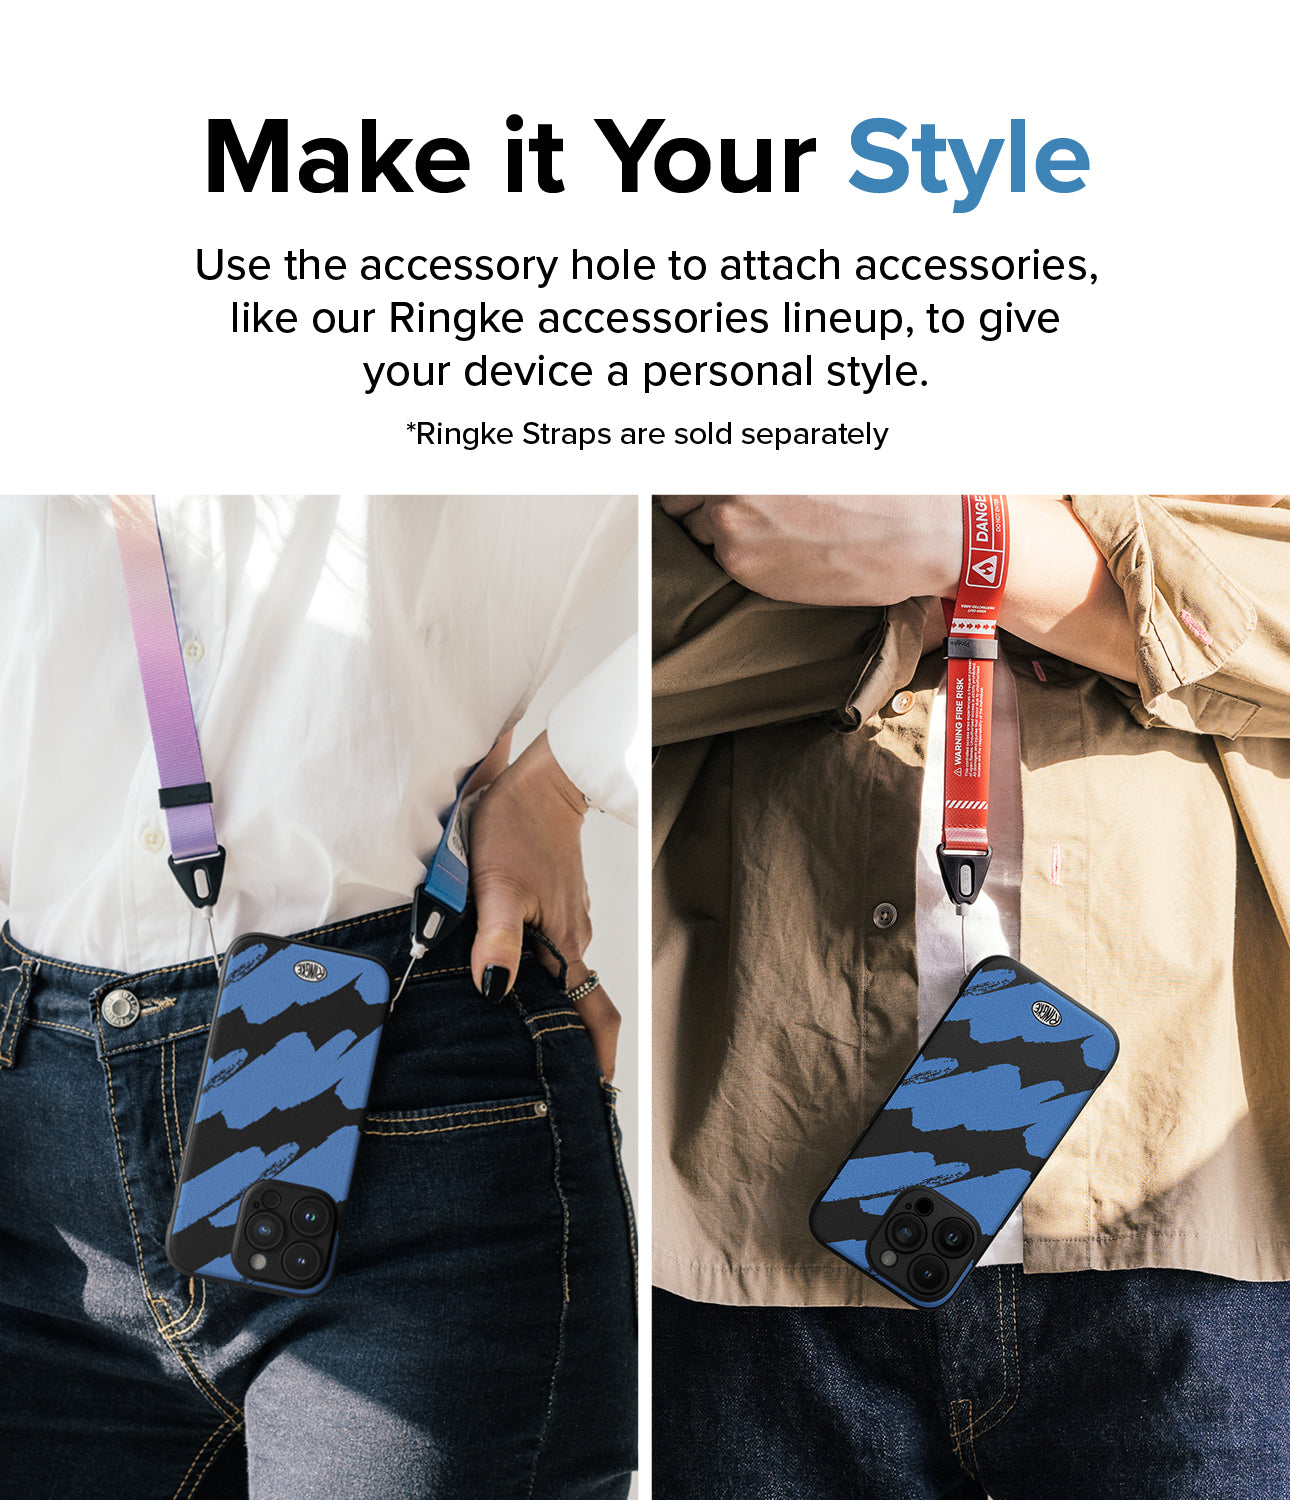 iPhone 15 Pro Case | Onyx Design - Blue Brush - Make it Your Style. Use the accessory hole to attach accessories, like our Ringke accessories lineup, to give your device a personal style.